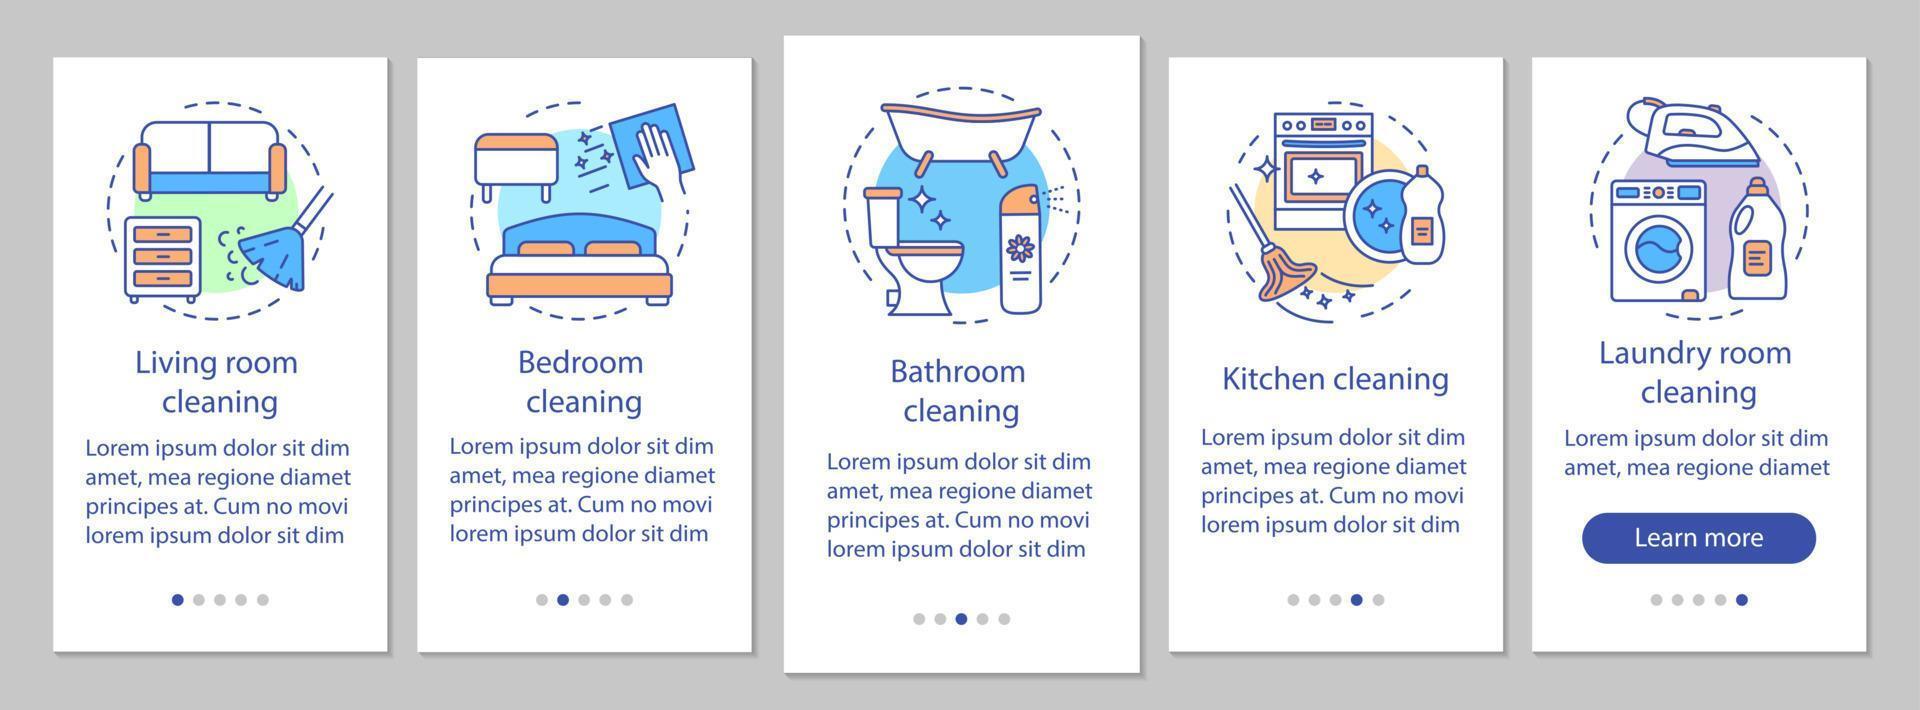 Home cleaning onboarding mobile app page screen, linear concepts. Living room, bedroom, bathroom cleanup. Five walkthrough steps graphic instructions. UX, UI, GUI vector template with illustrations